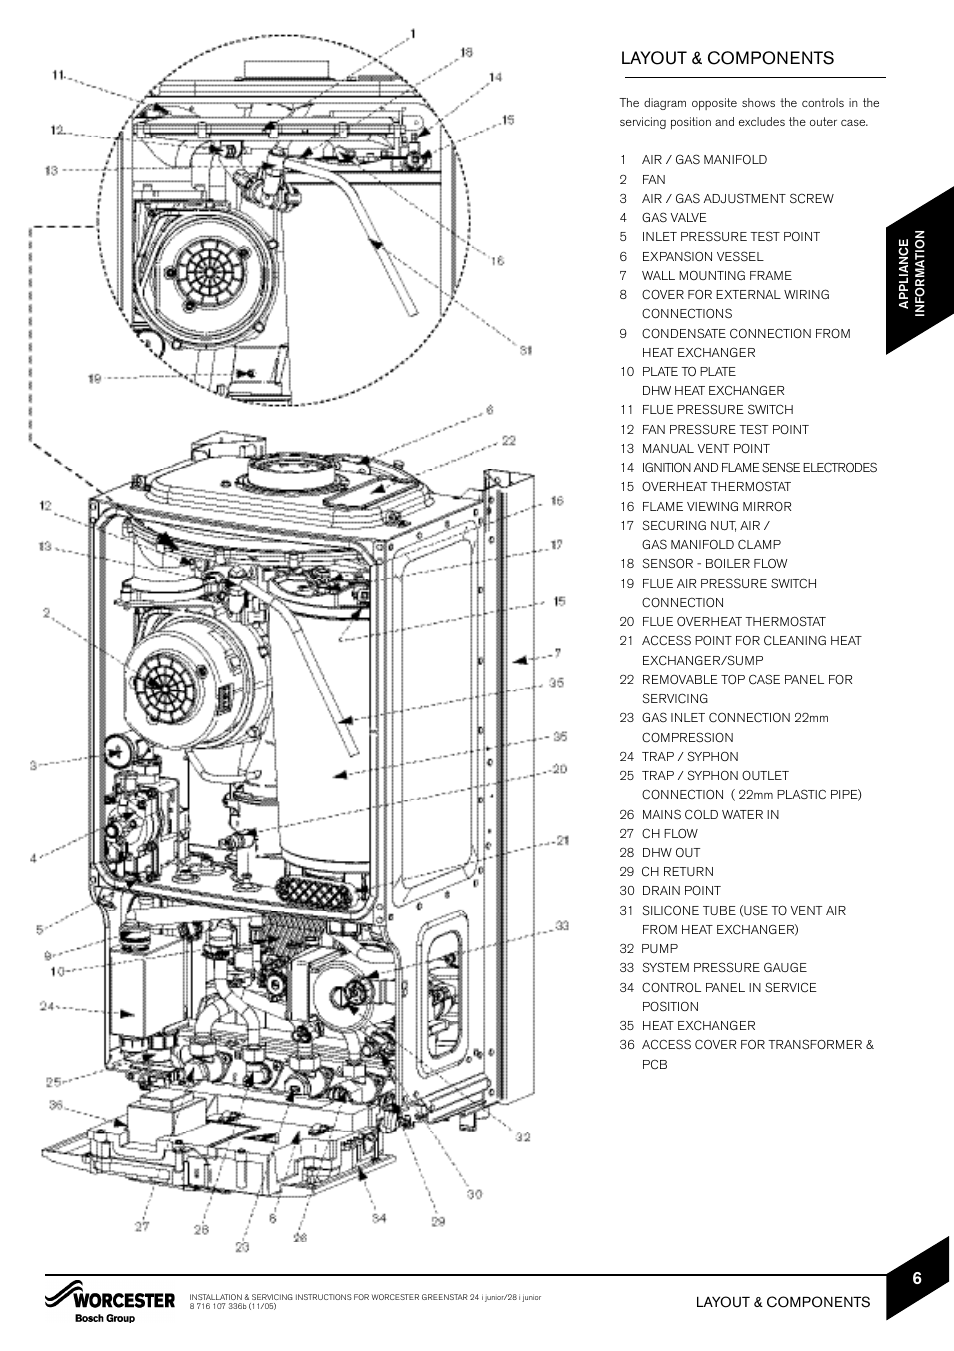 Layout & components | Bosch GREENSTAR 24i junior User Manual | Page 7 / 62